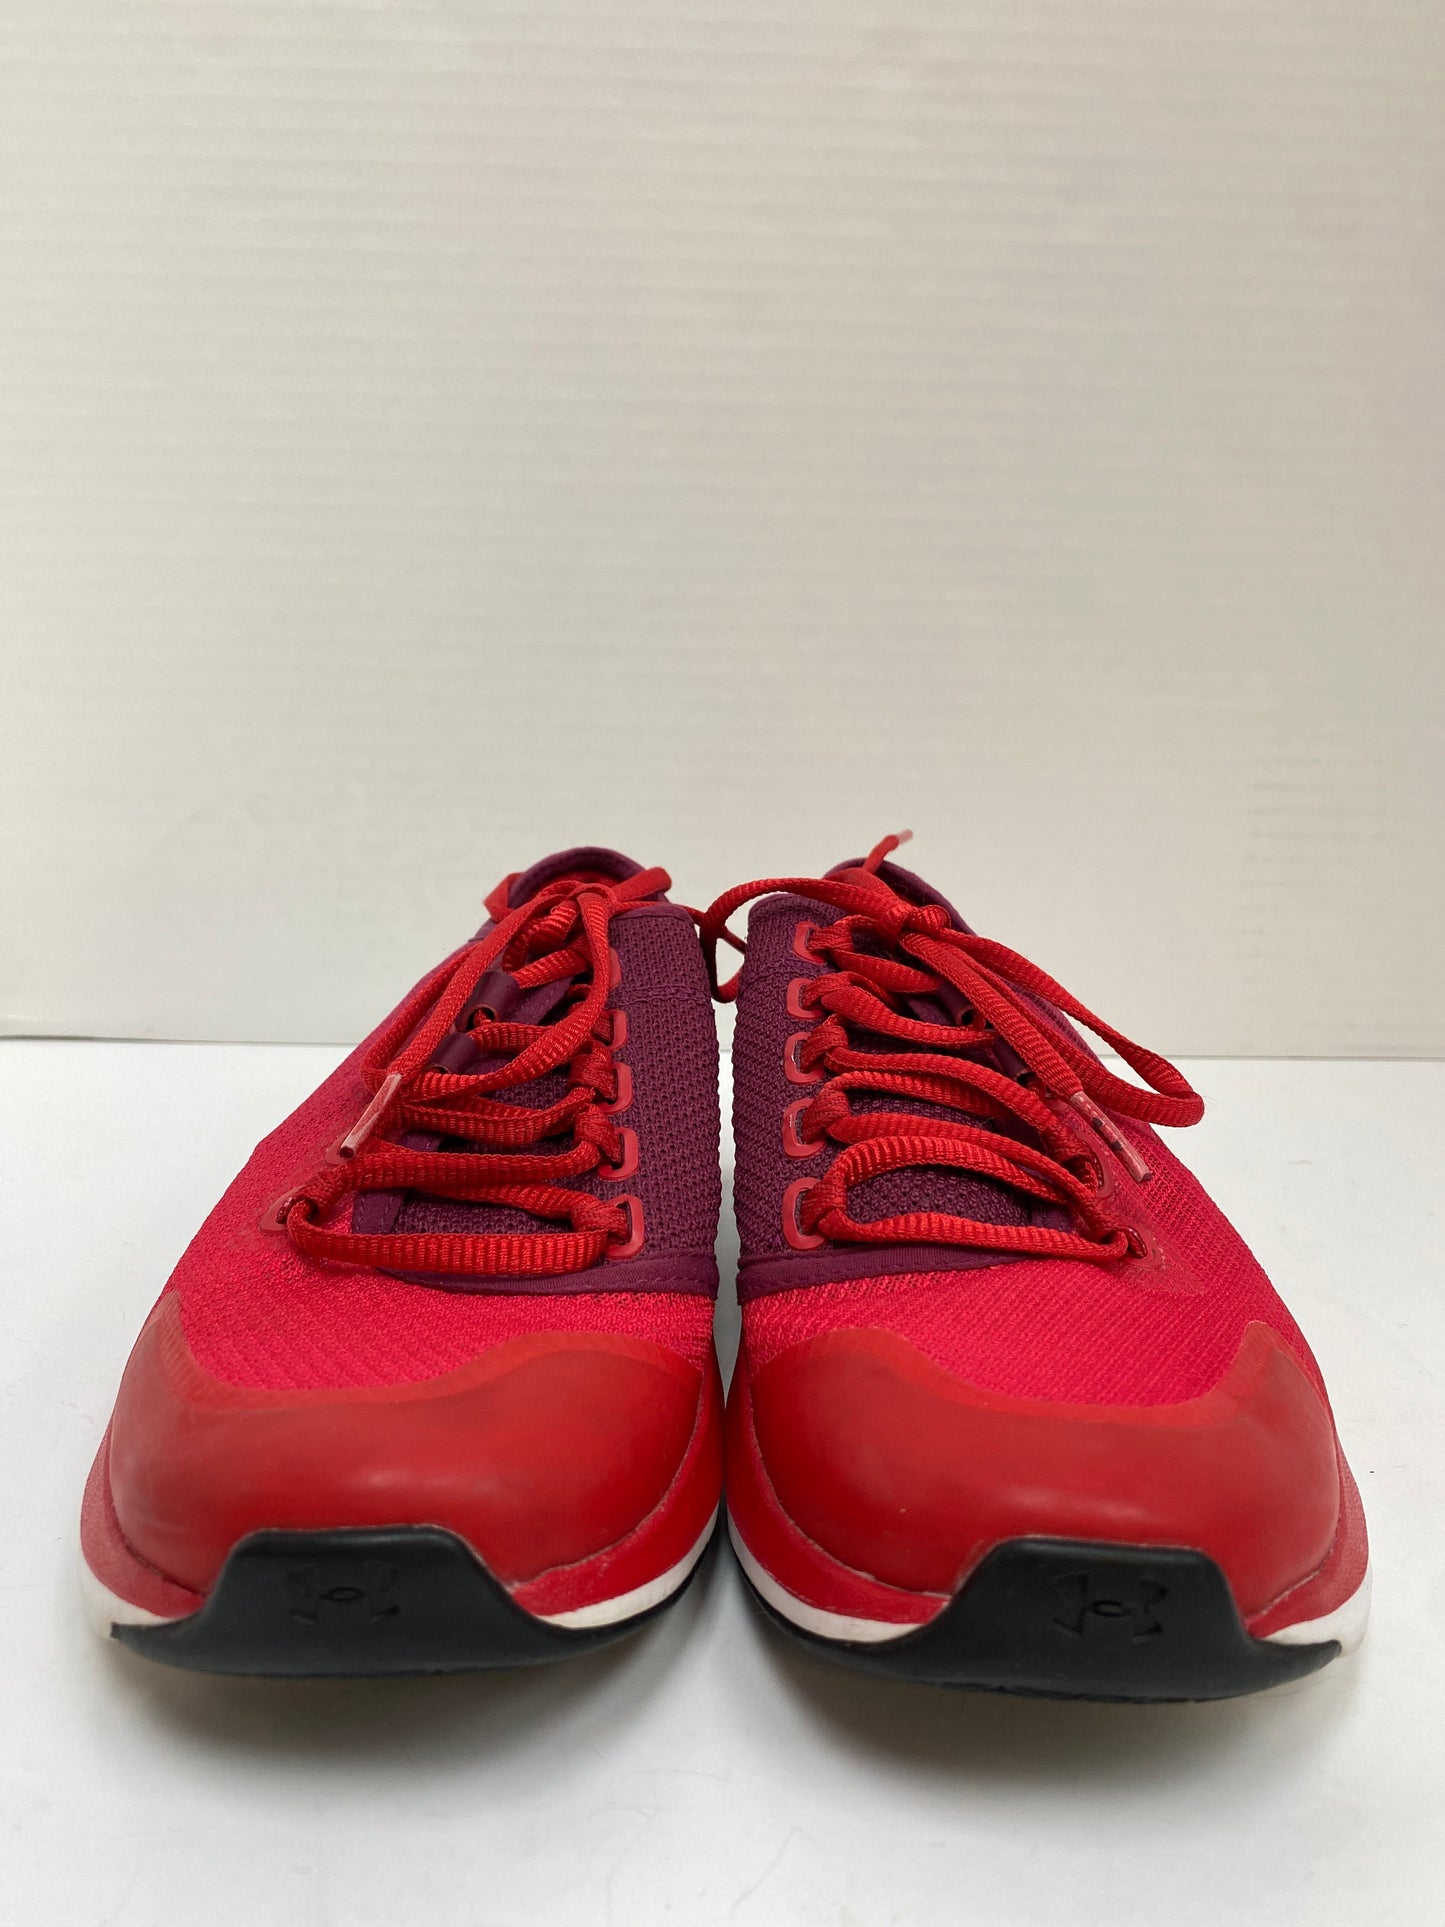 Shoes Athletic By Under Armour  Size: 7